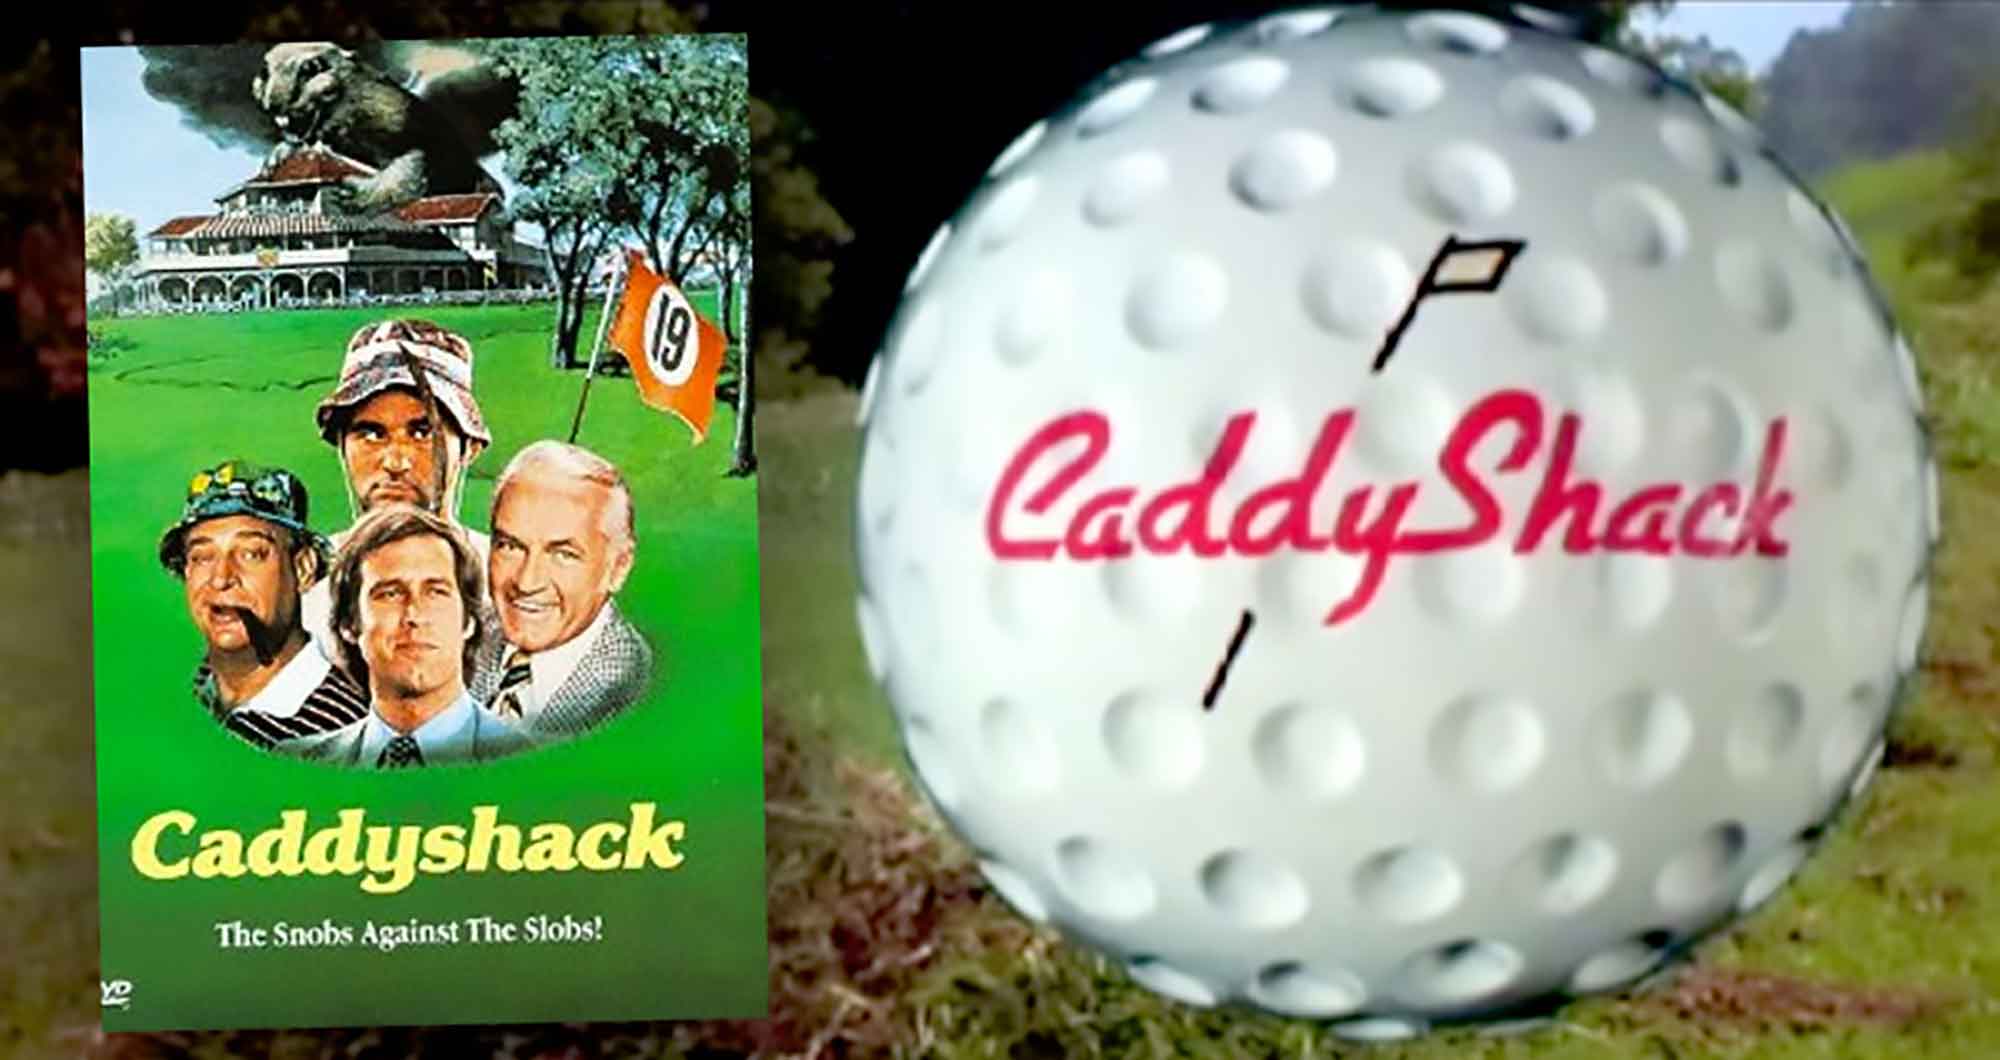 30 Quotes from The Movie Caddyshack That'll Brighten Your Day